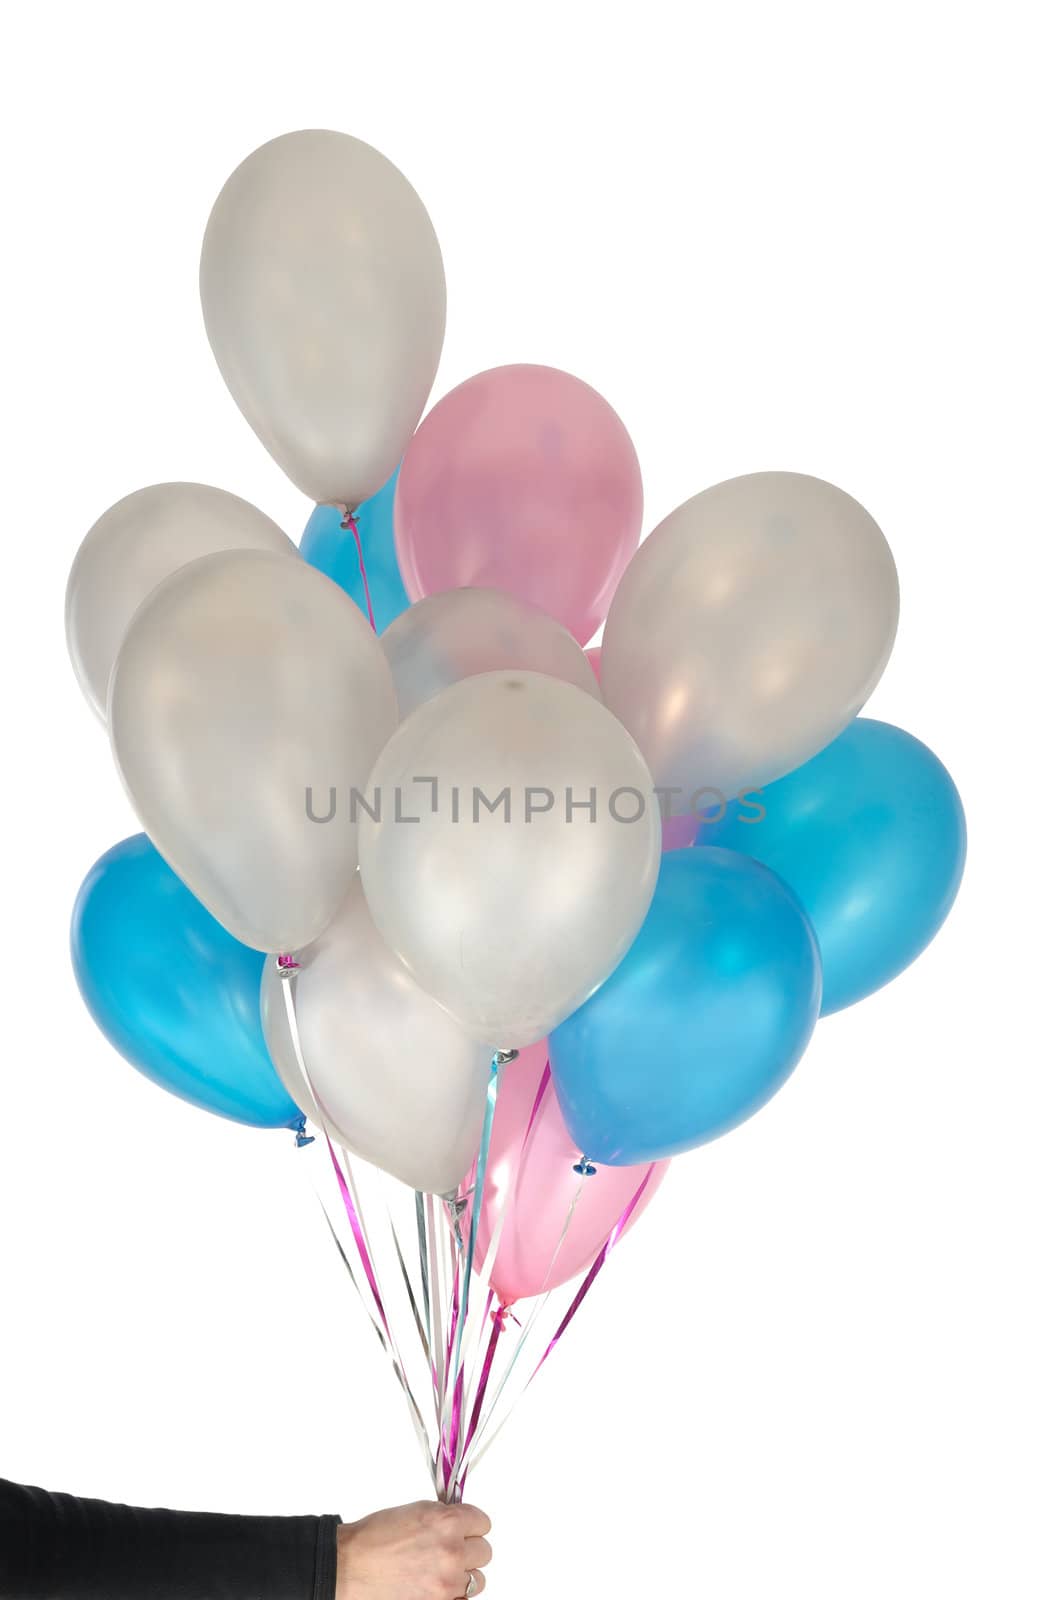 Hand is holding many ballons. On clean white background.